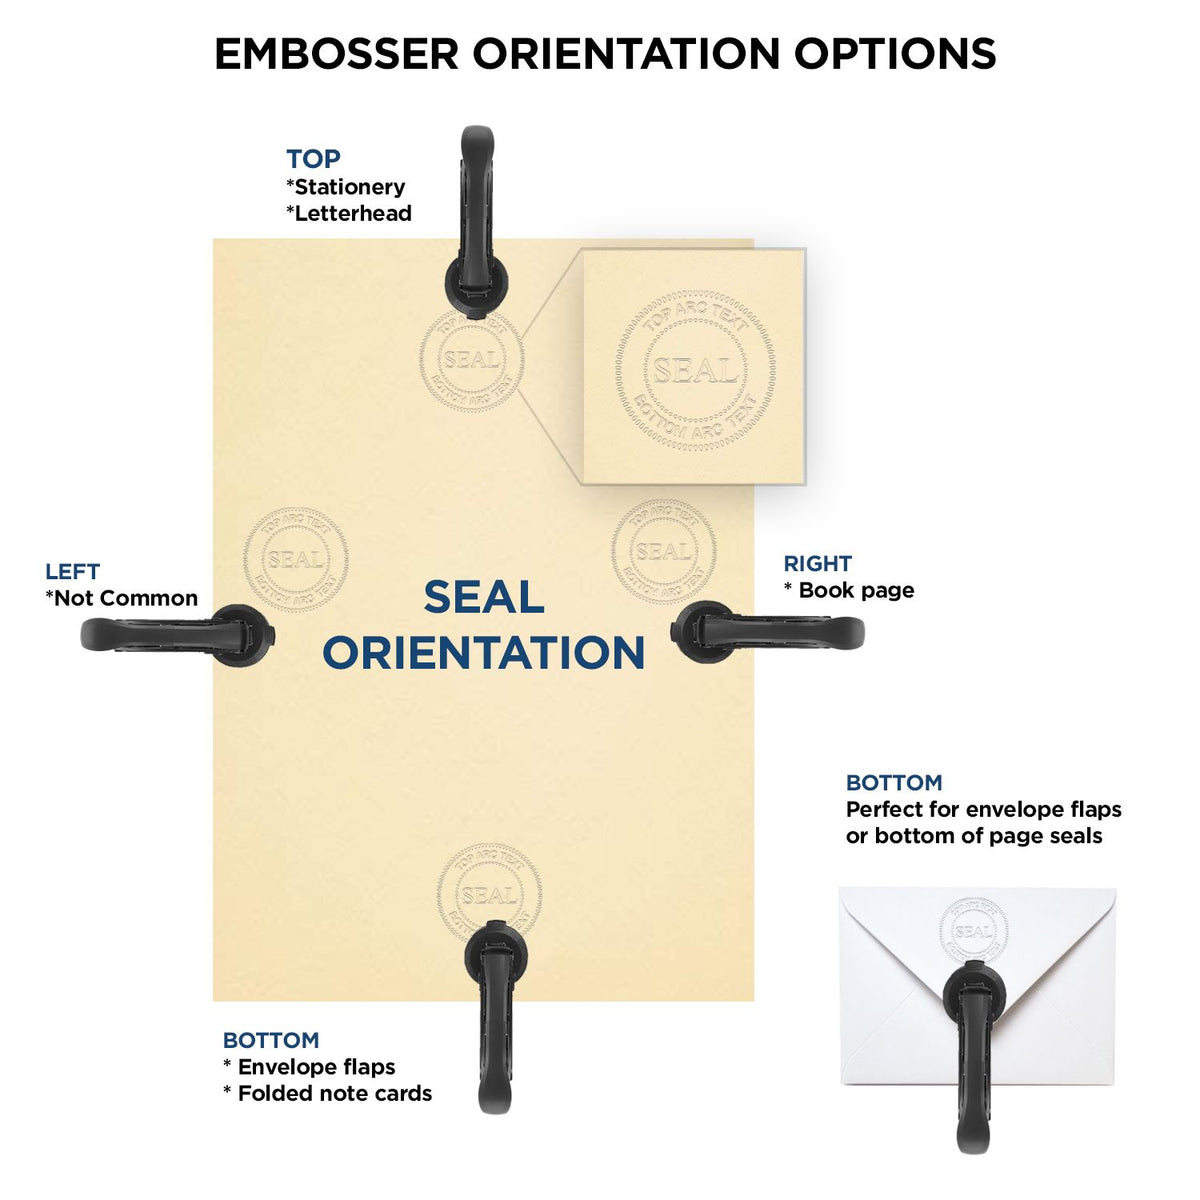 An infographic for the Heavy Duty Cast Iron Vermont Architect Embosser showing embosser orientation, this is showing examples of a top, bottom, right and left insert.